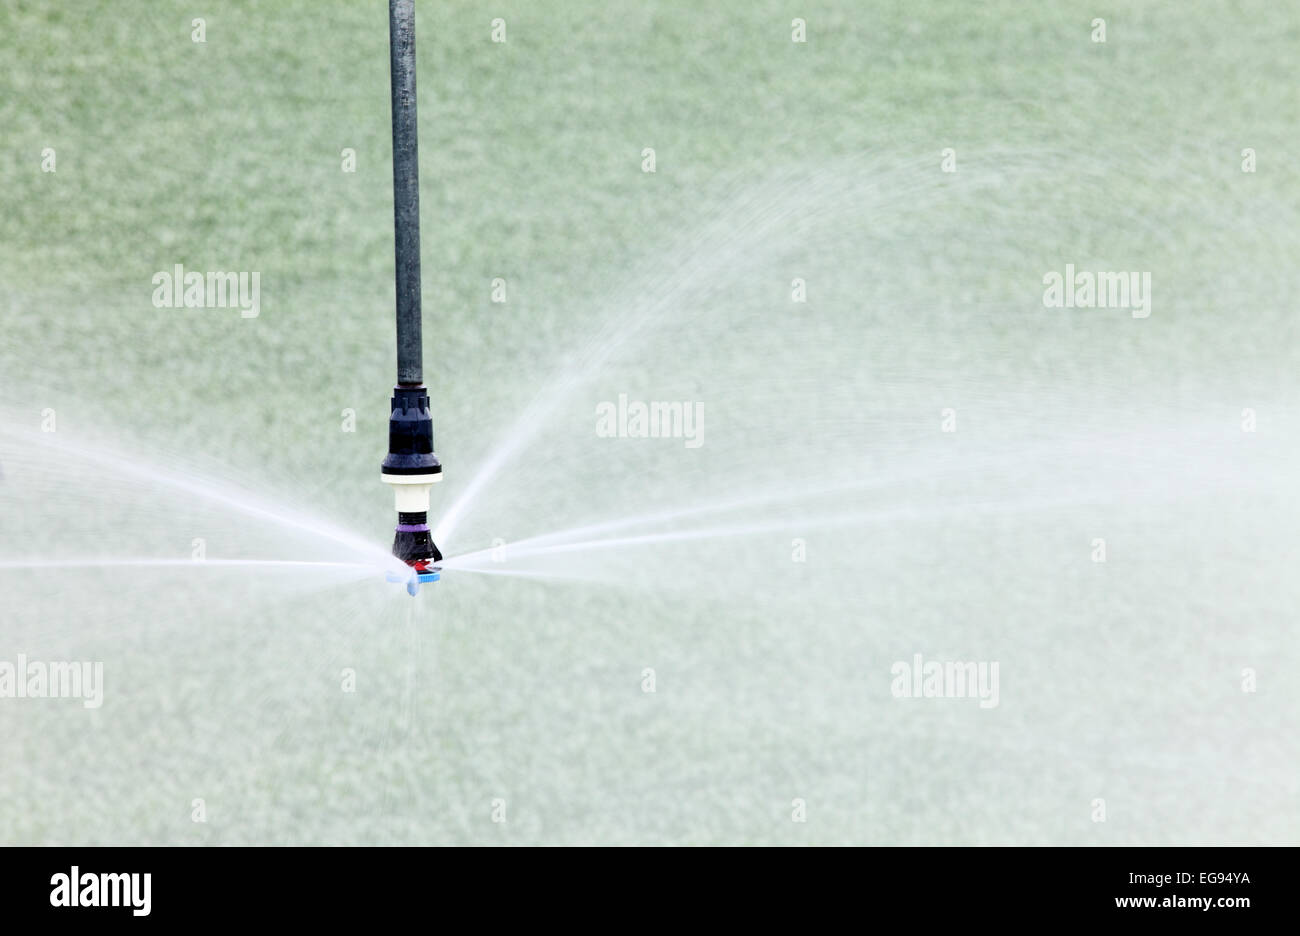 A closeup view of a high tech water conserving agricultural sprinkler head for irrigating farm crops. Stock Photo